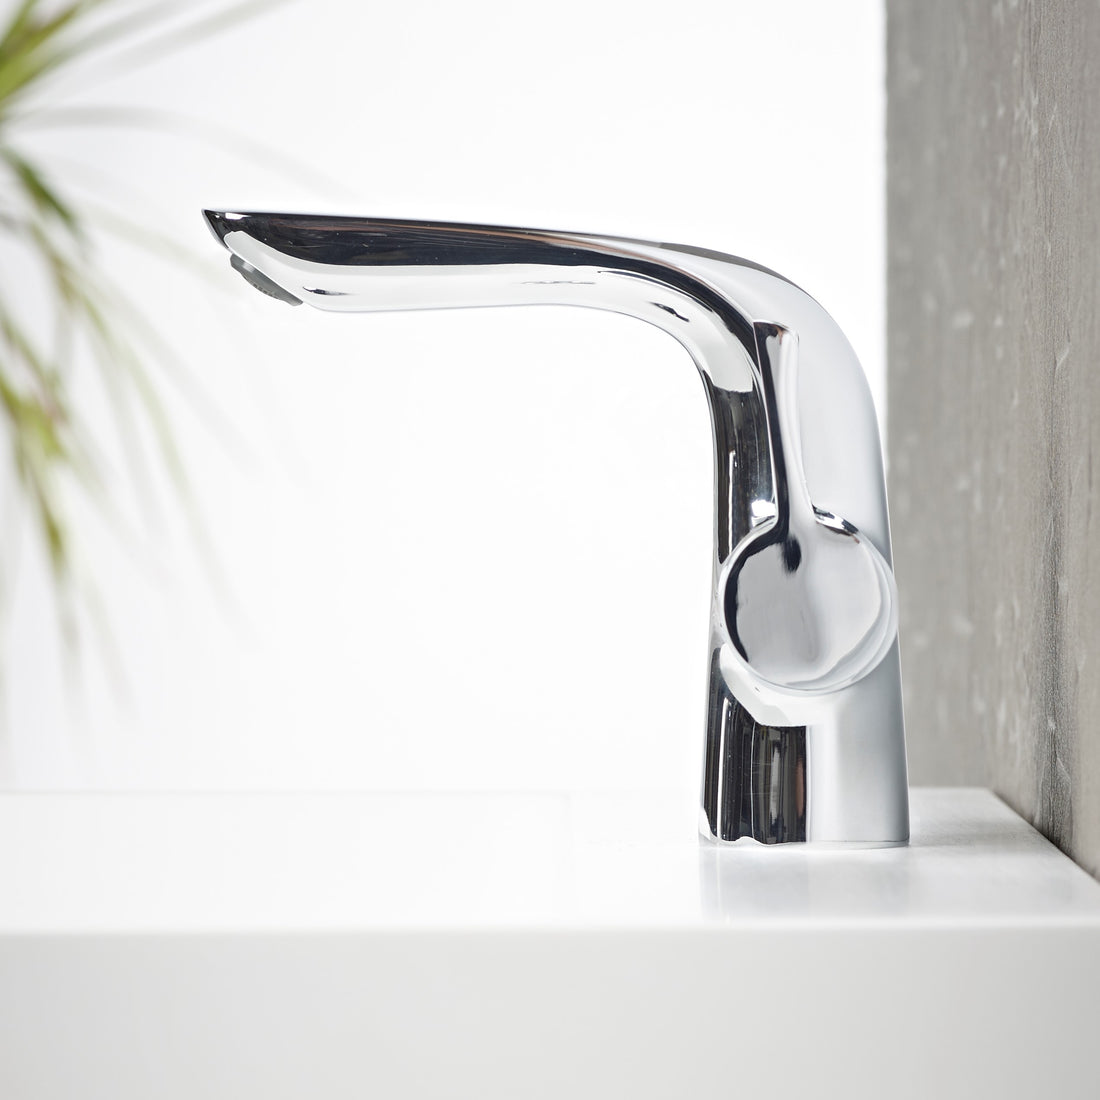 Tavistock Revive Basin Mixer With Click Waste - Chrome close up view blurred background TRV11